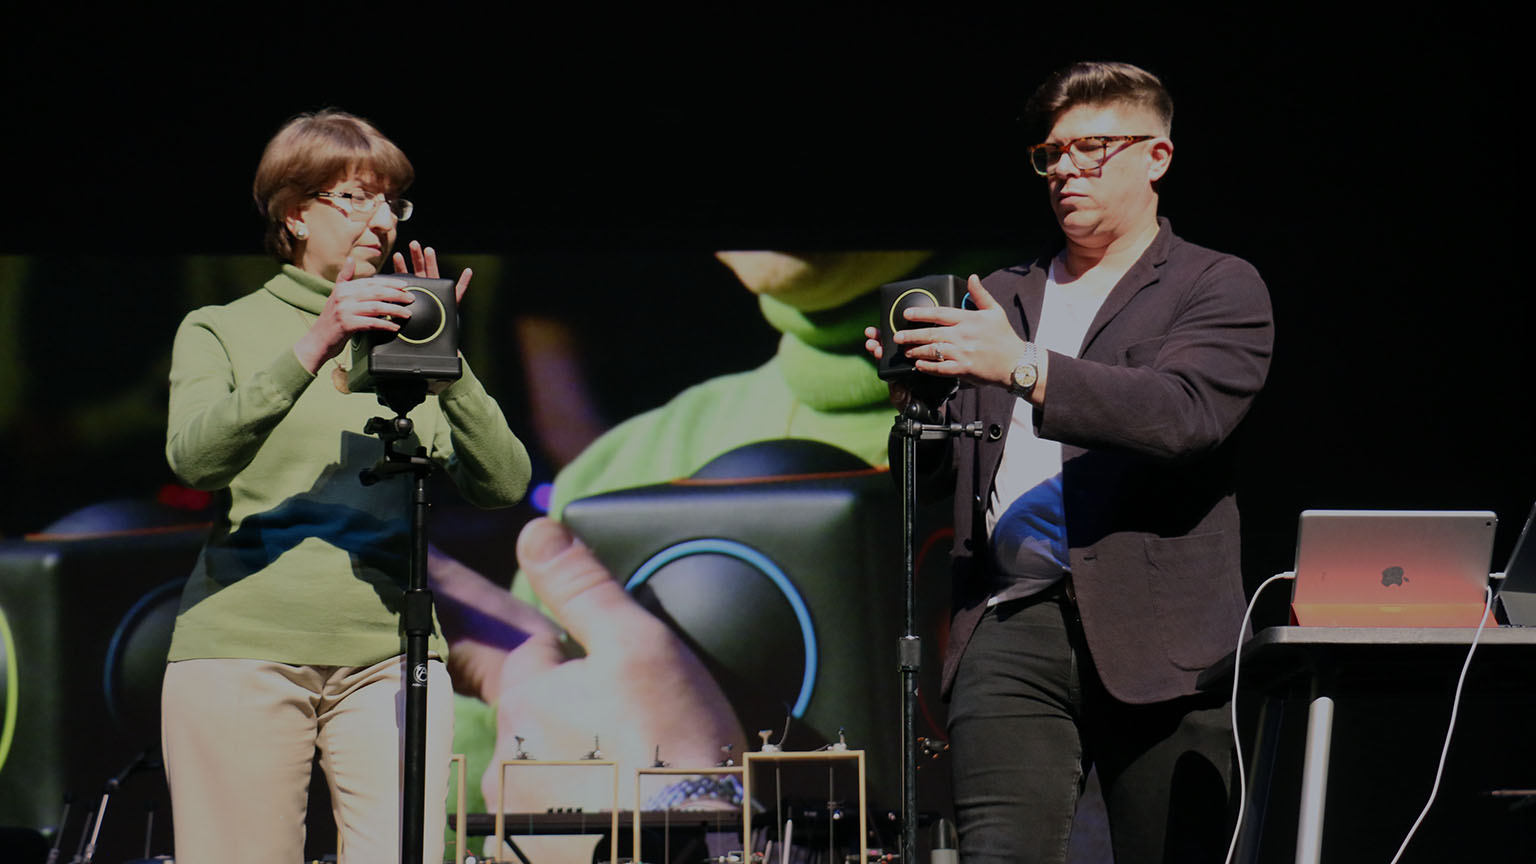 Two people on stage using a cube with different colored sides to play music.